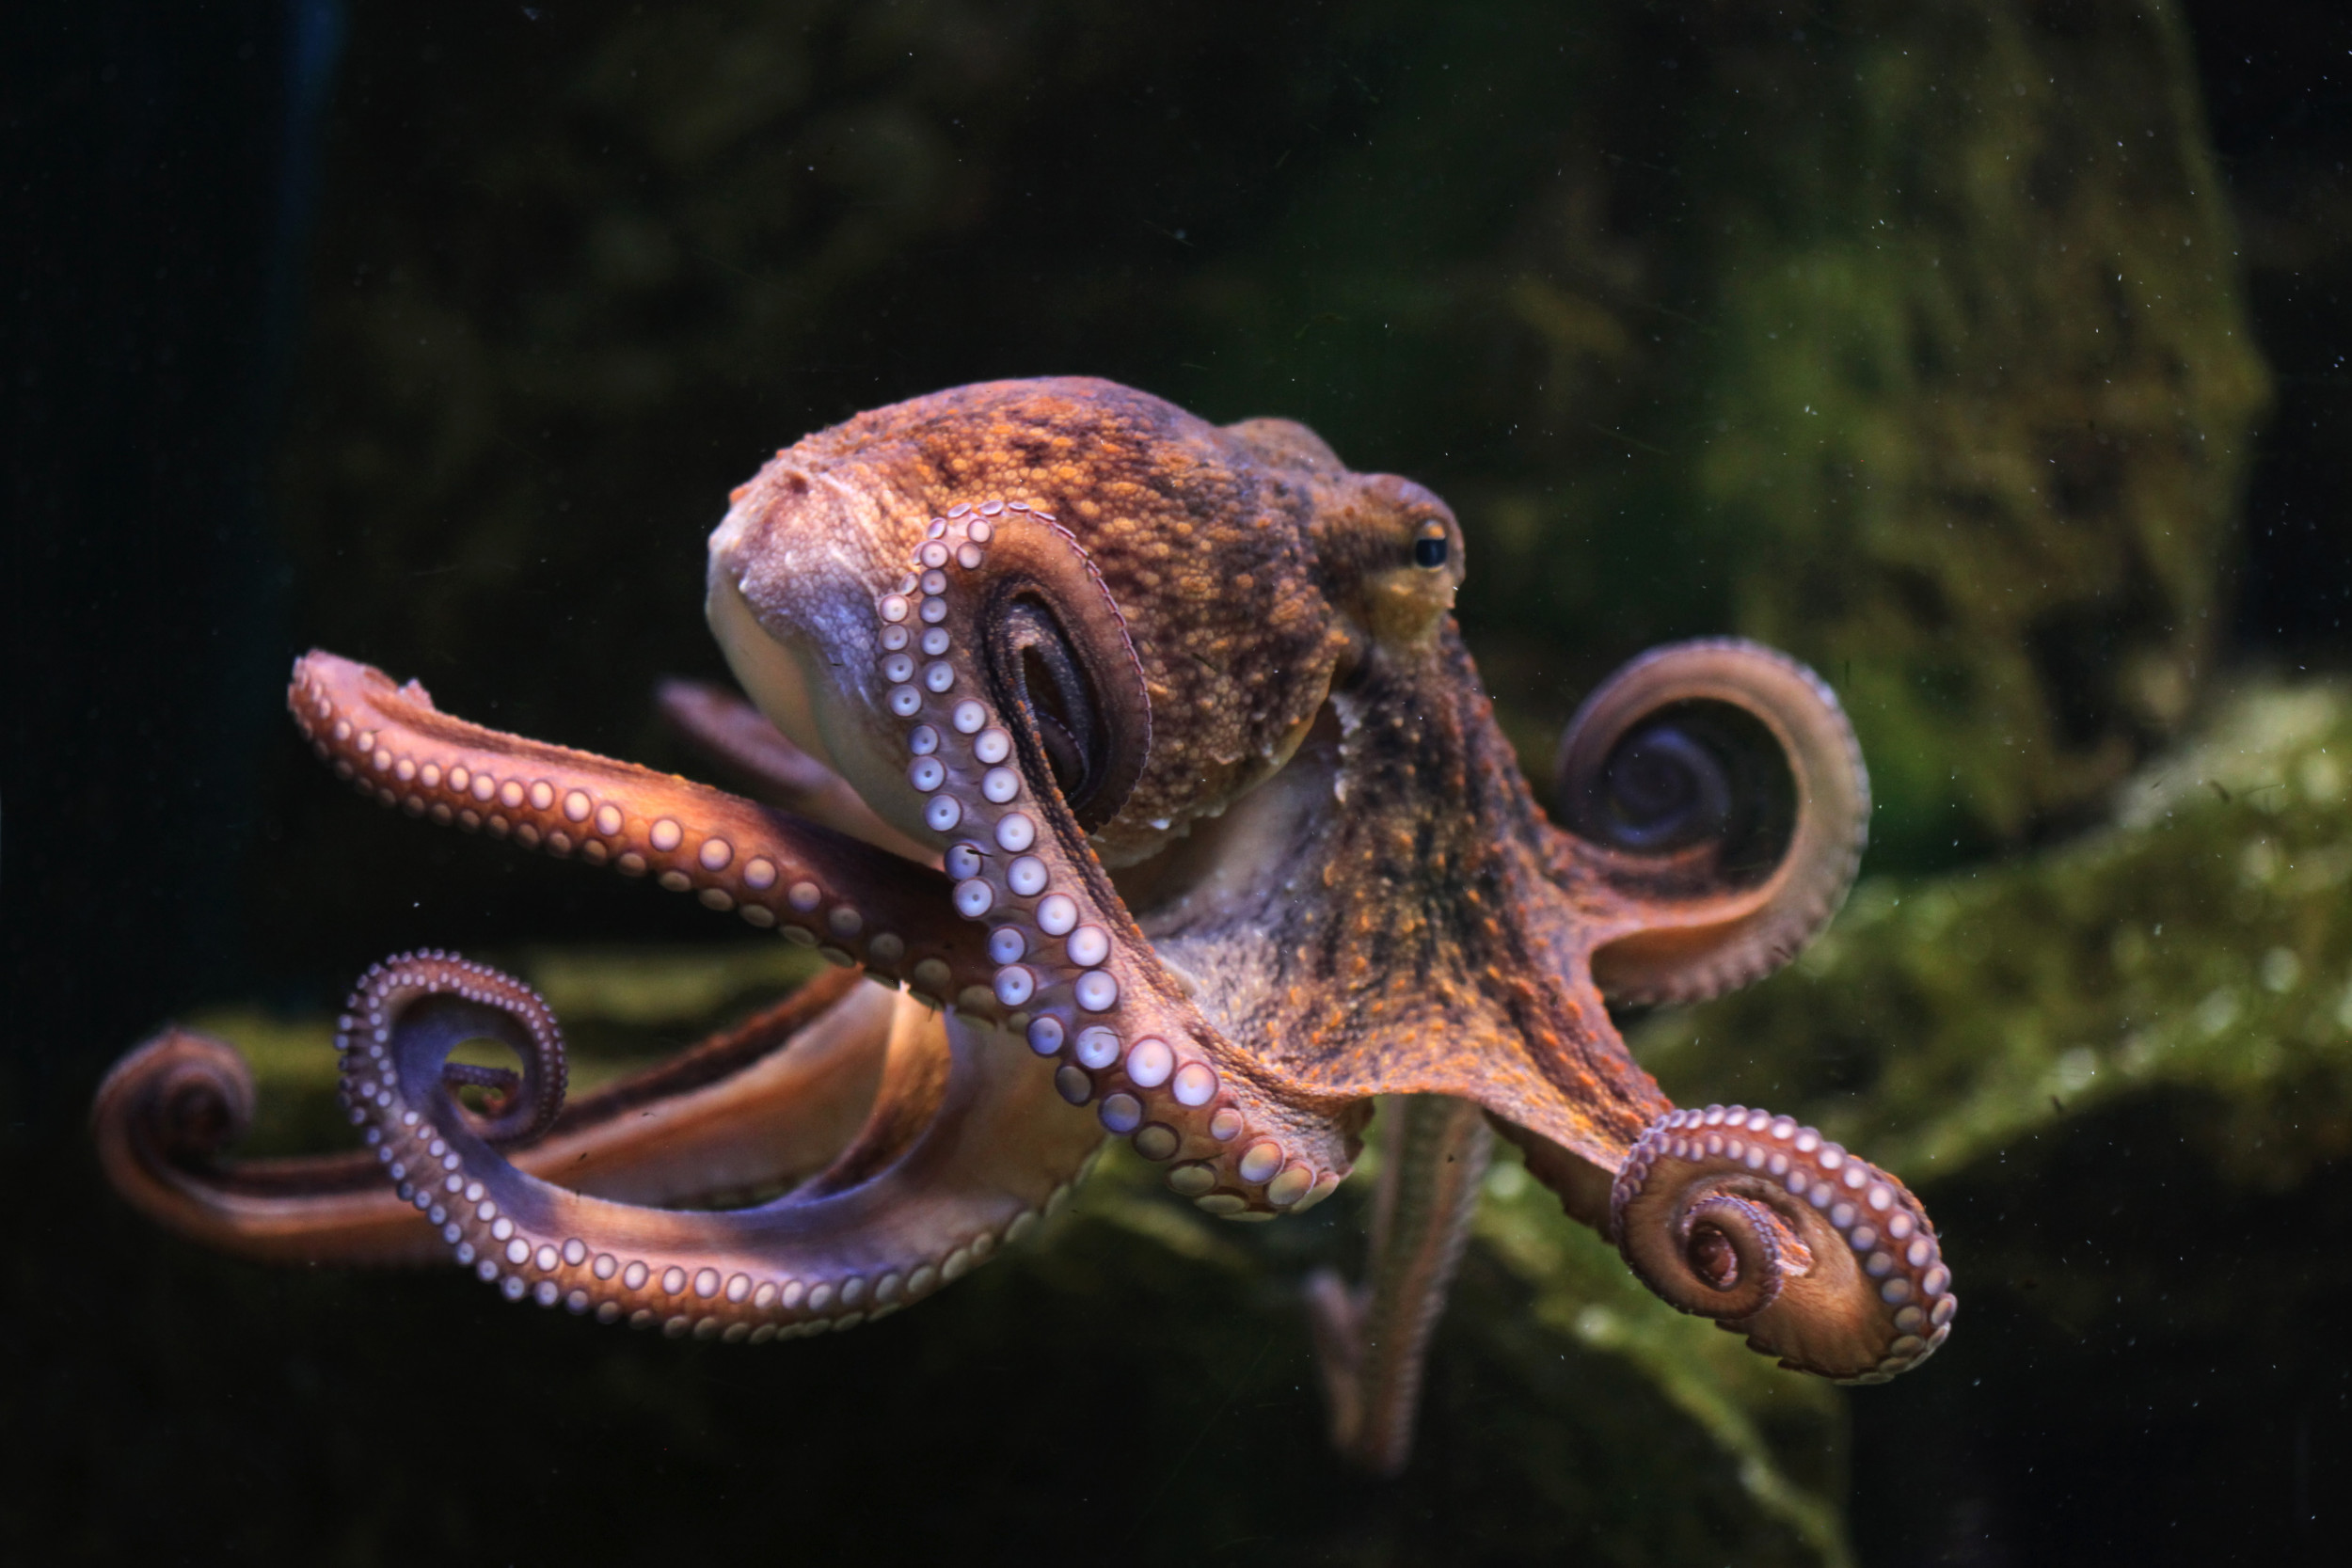 Octopus That Changes Color While Sleeping Might Be Dreaming, Scientist